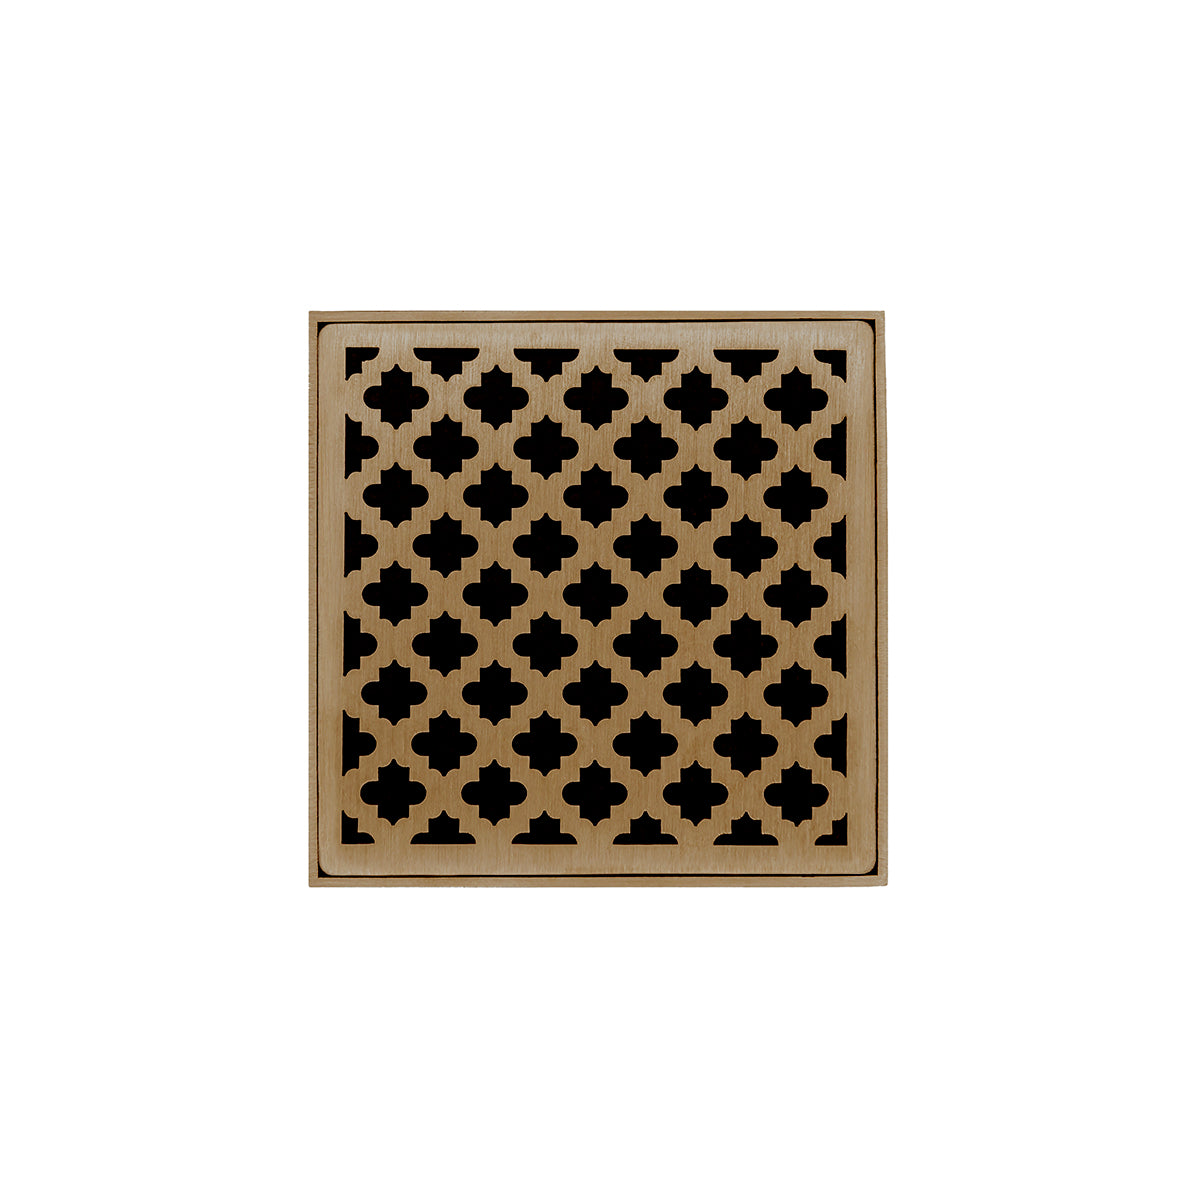 Infinity Drain 4" x 4" MD 4 Premium Center Drain Kit with Moor Pattern Decorative Plate with PVC Drain Body, 2" Outlet